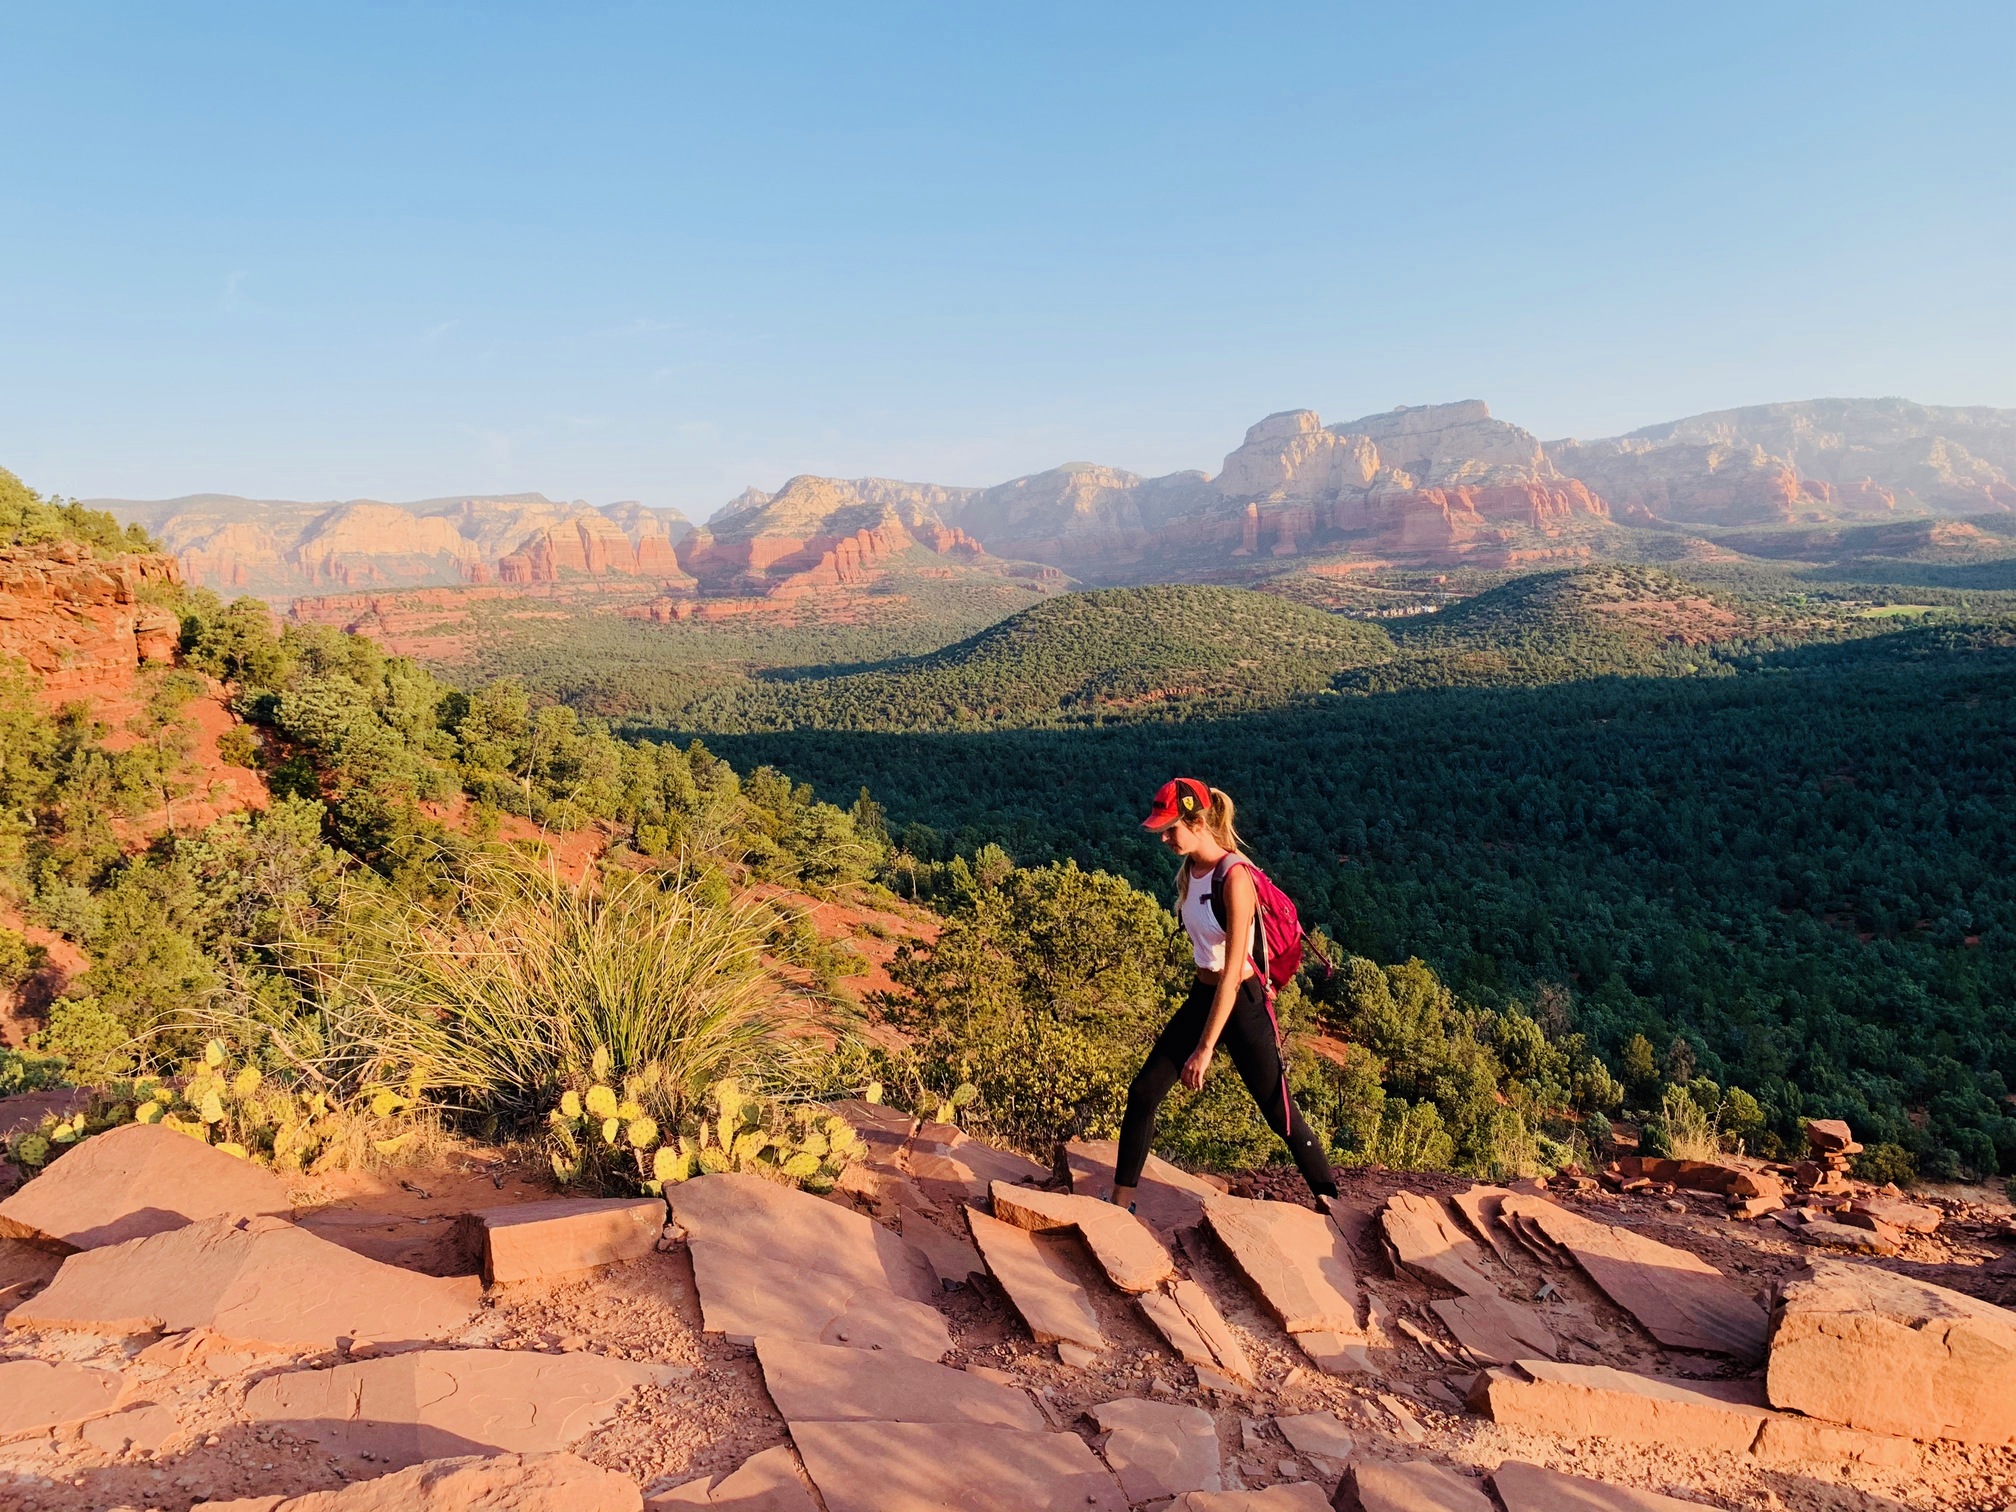 The Best of Sedona - Wandering to Bliss